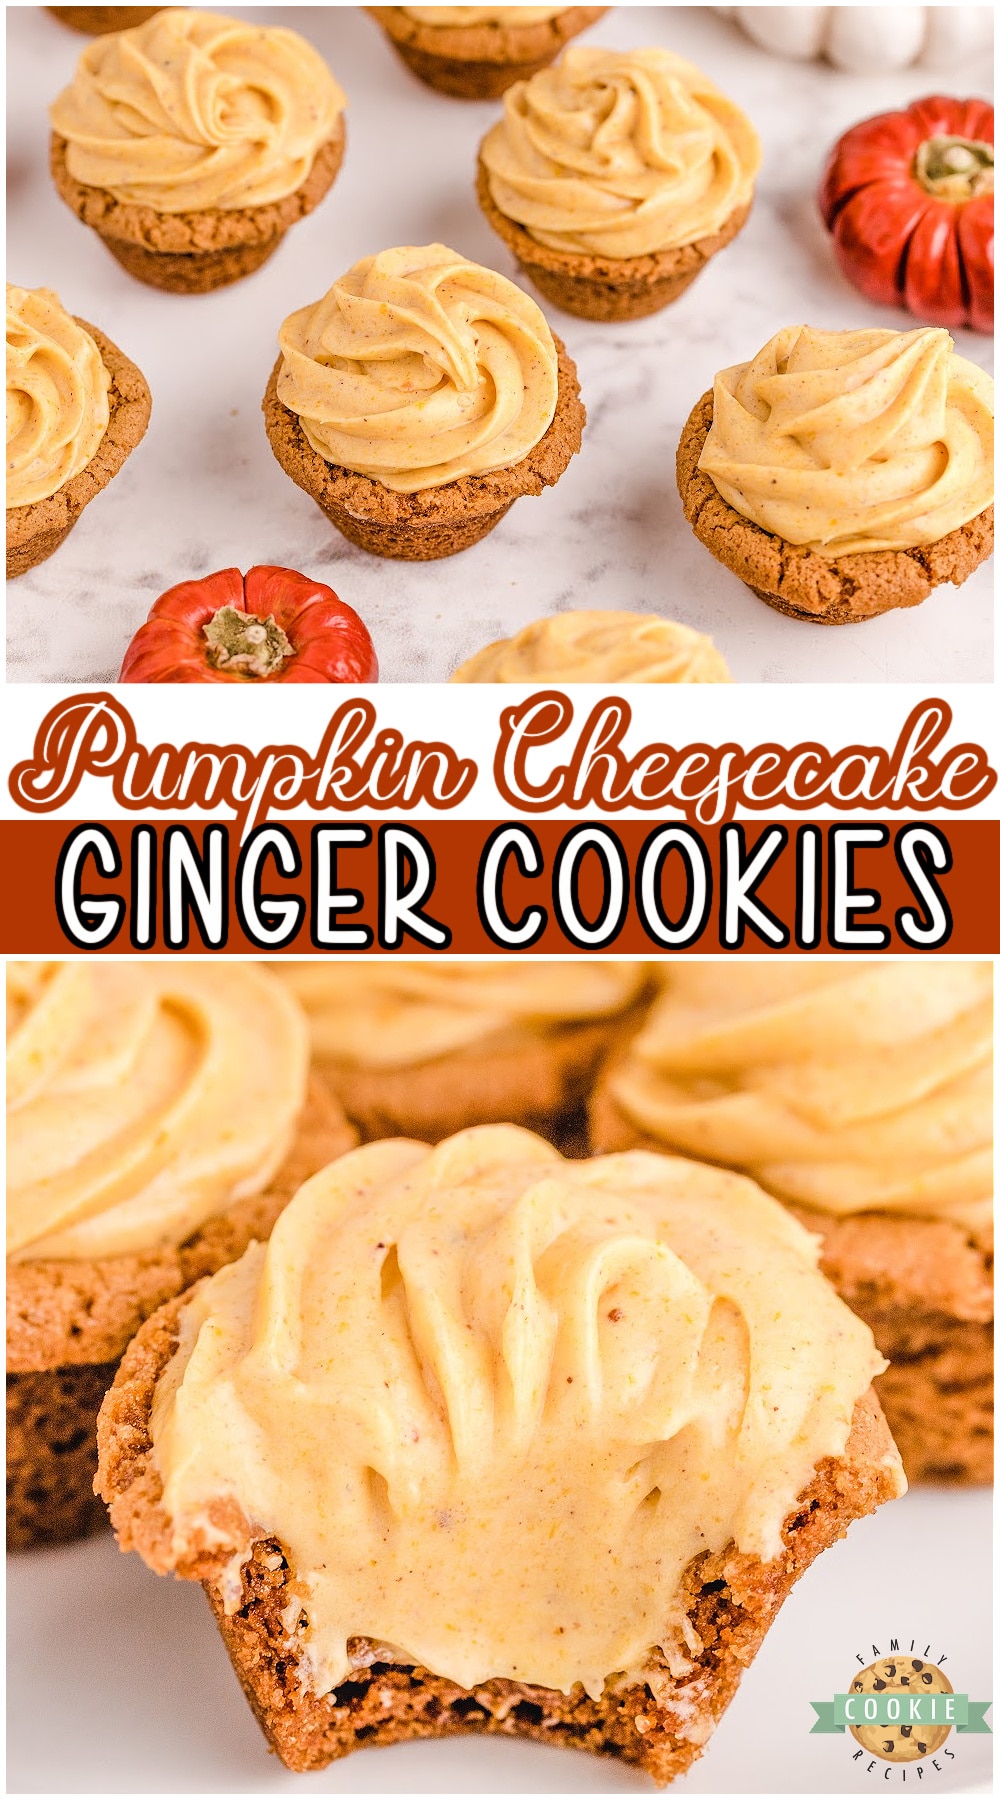 Ginger Cookies filled with a delicious spiced Pumpkin Cheesecake perfect for Fall! Lovely pumpkin cheesecake ginger cookie recipe that everyone loves! #cookies #ginger #pumpkin #cheesecake #easyrecipe from FAMILY COOKIE RECIPES